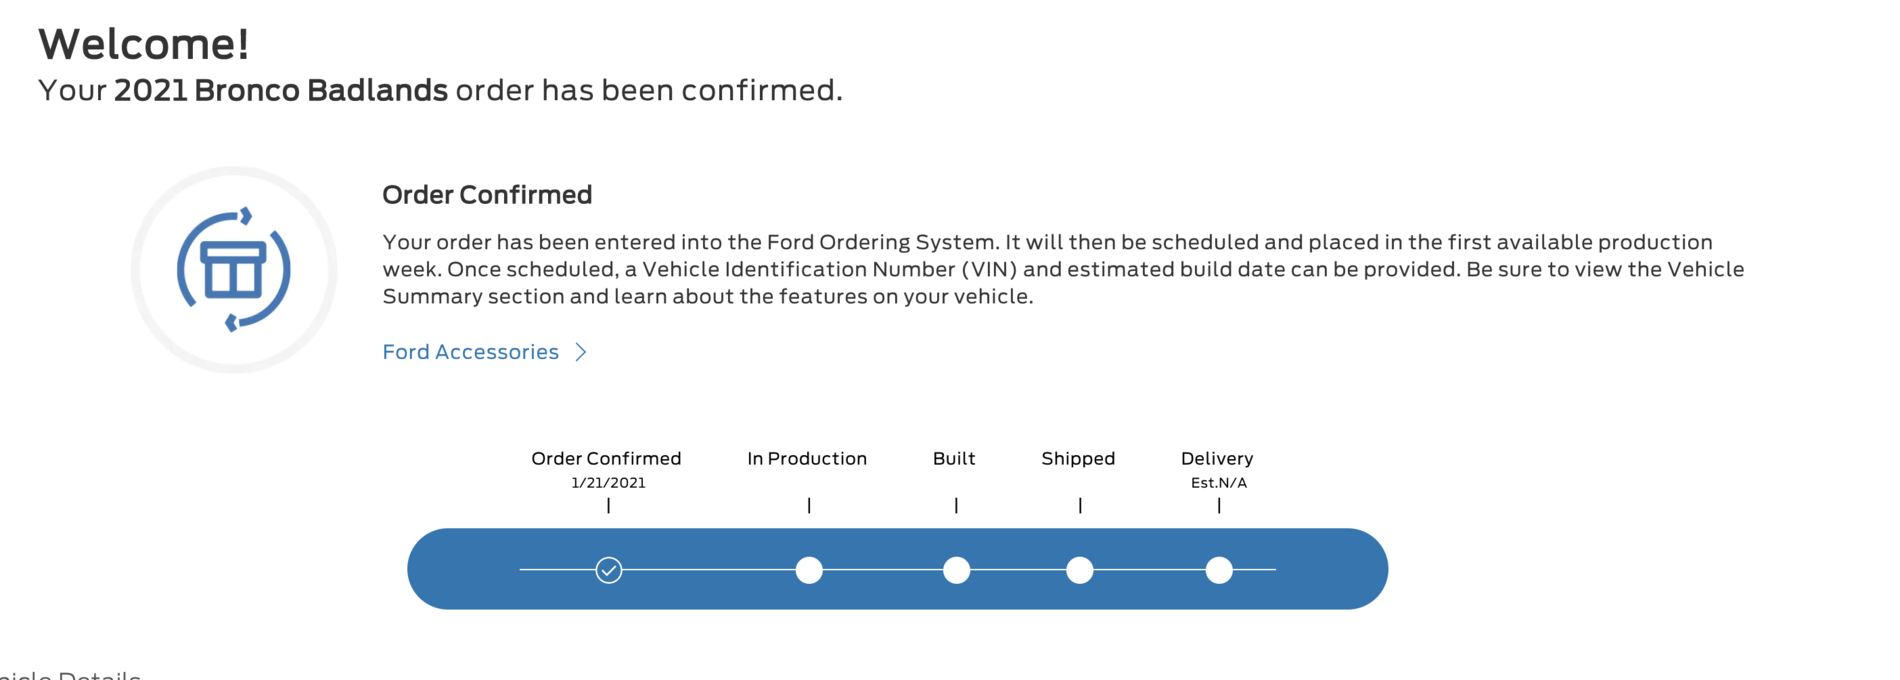 Ford Bronco THE my Bronco production build date has been DELAYED / MOVED BACK thread Screen Shot 2021-05-17 at 10.47.04 AM